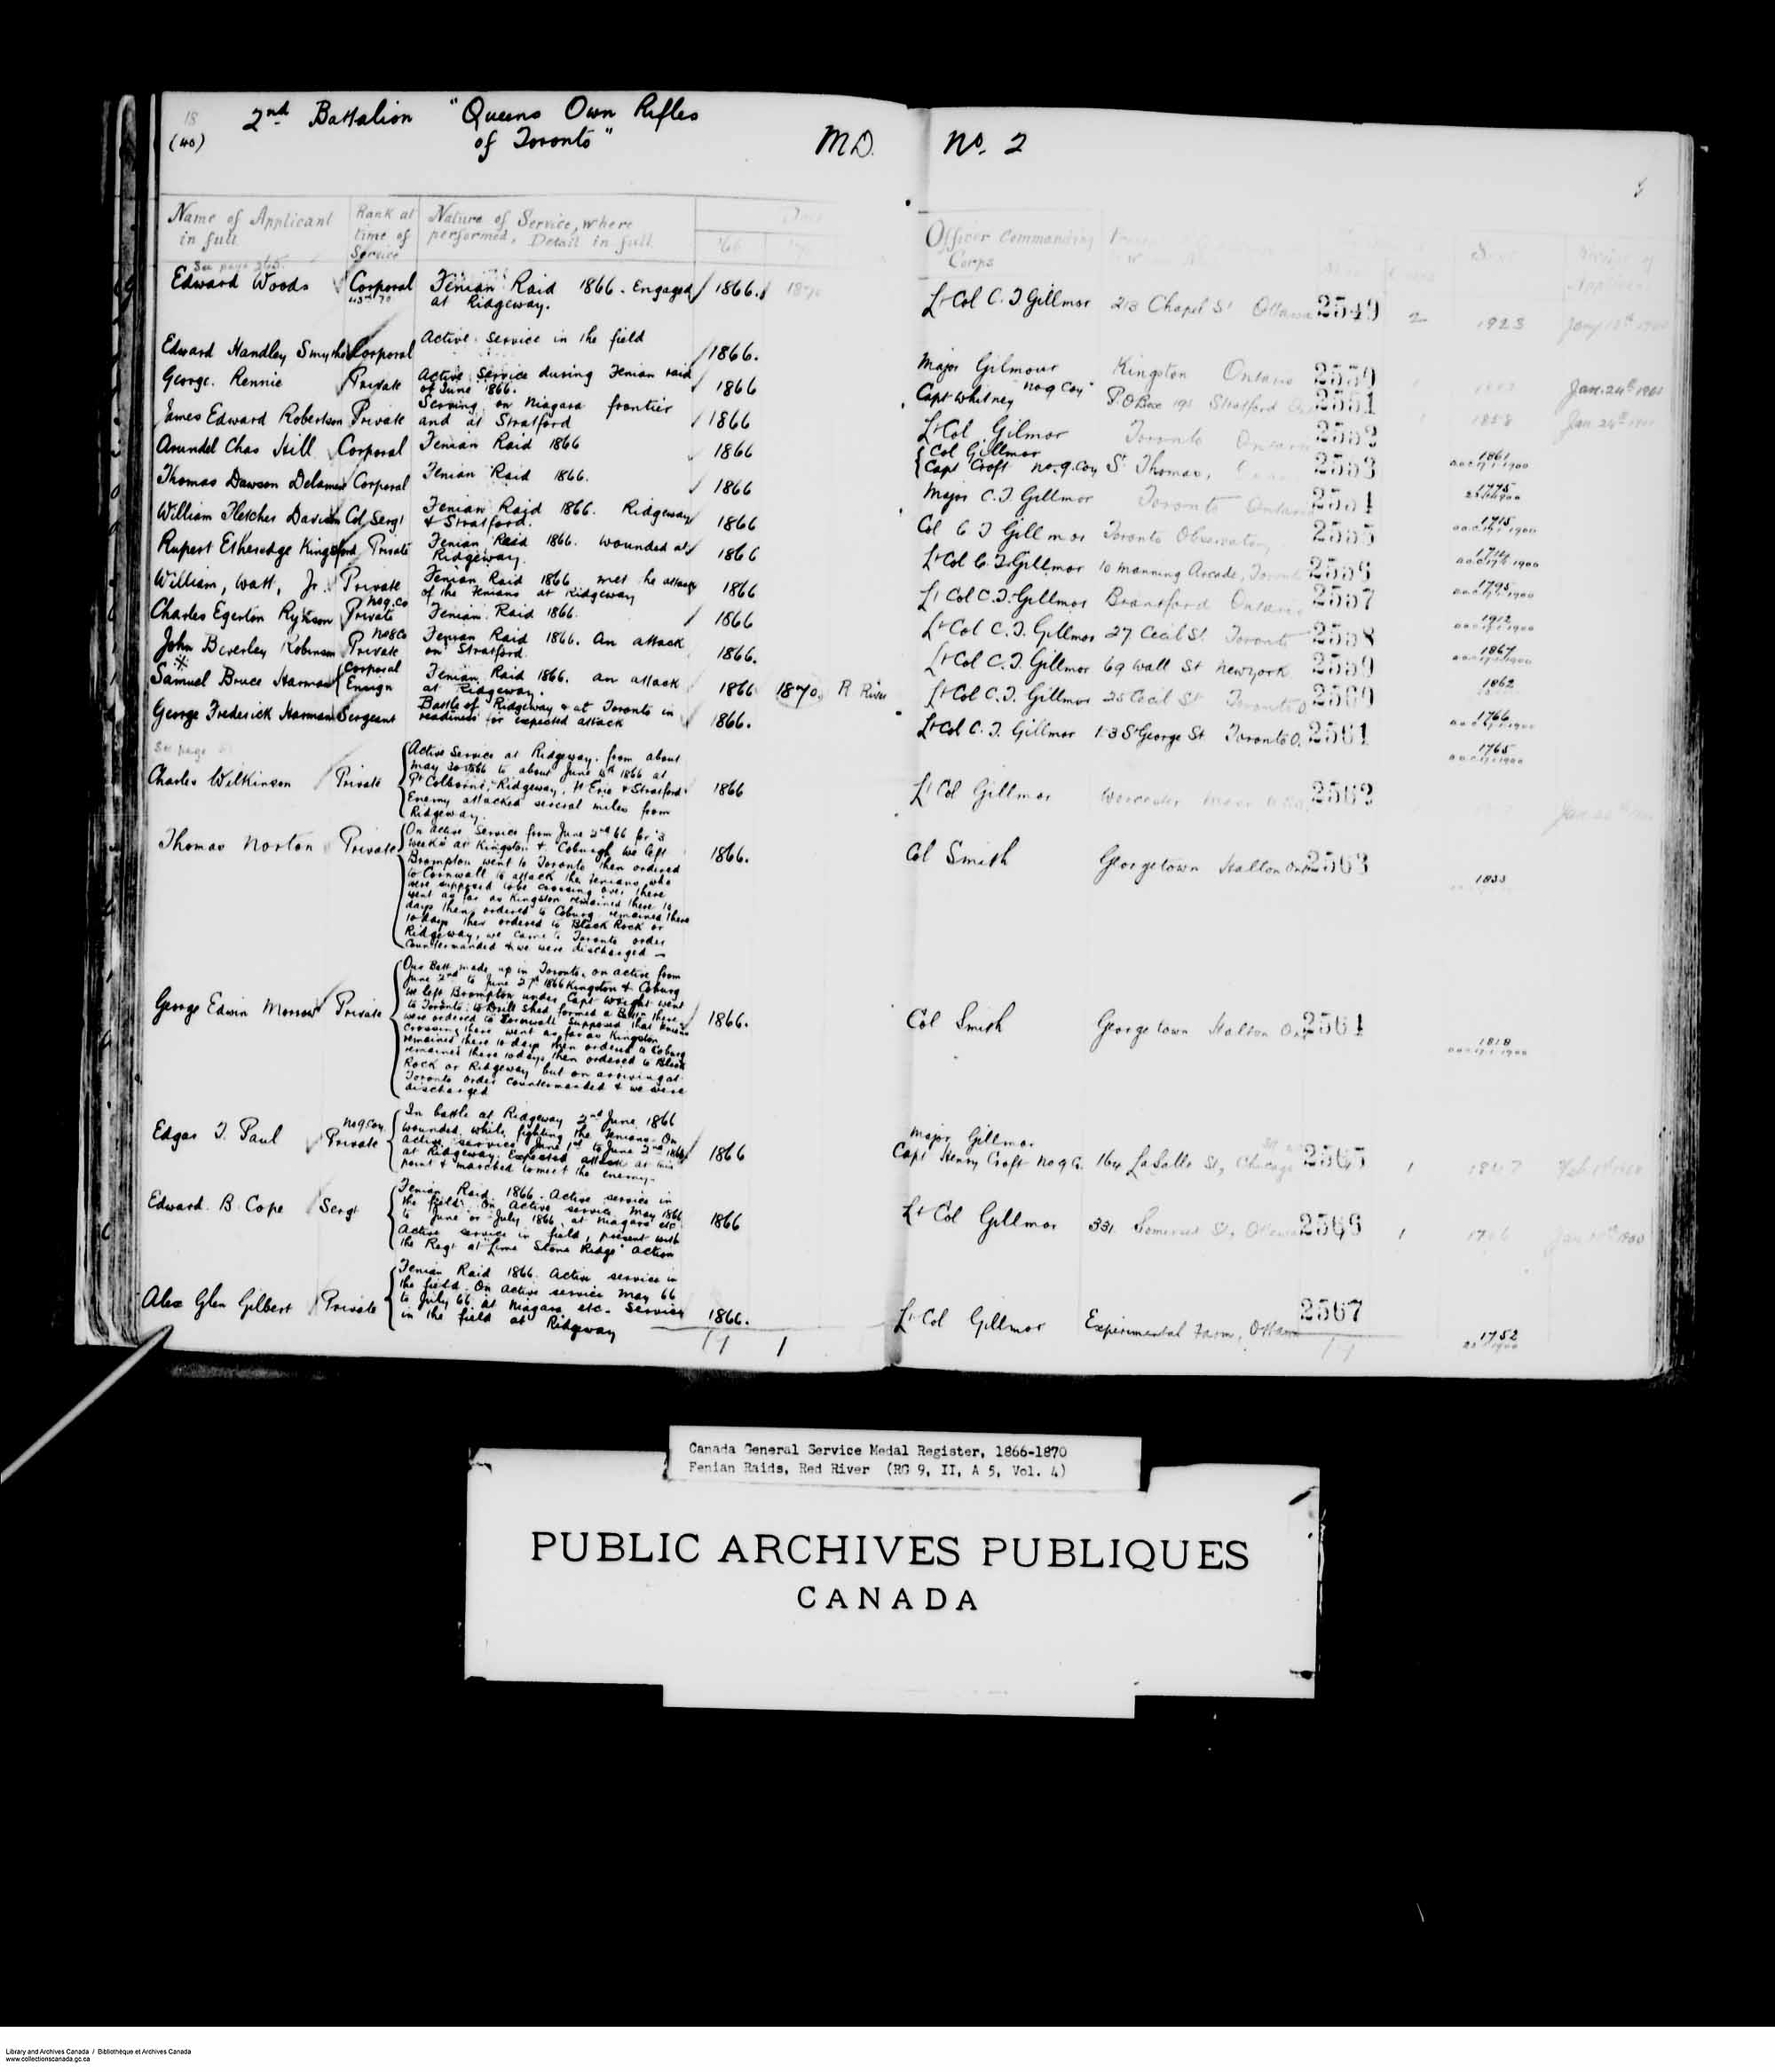 Digitized page of Medals, Honours and Awards for Image No.: e008681703